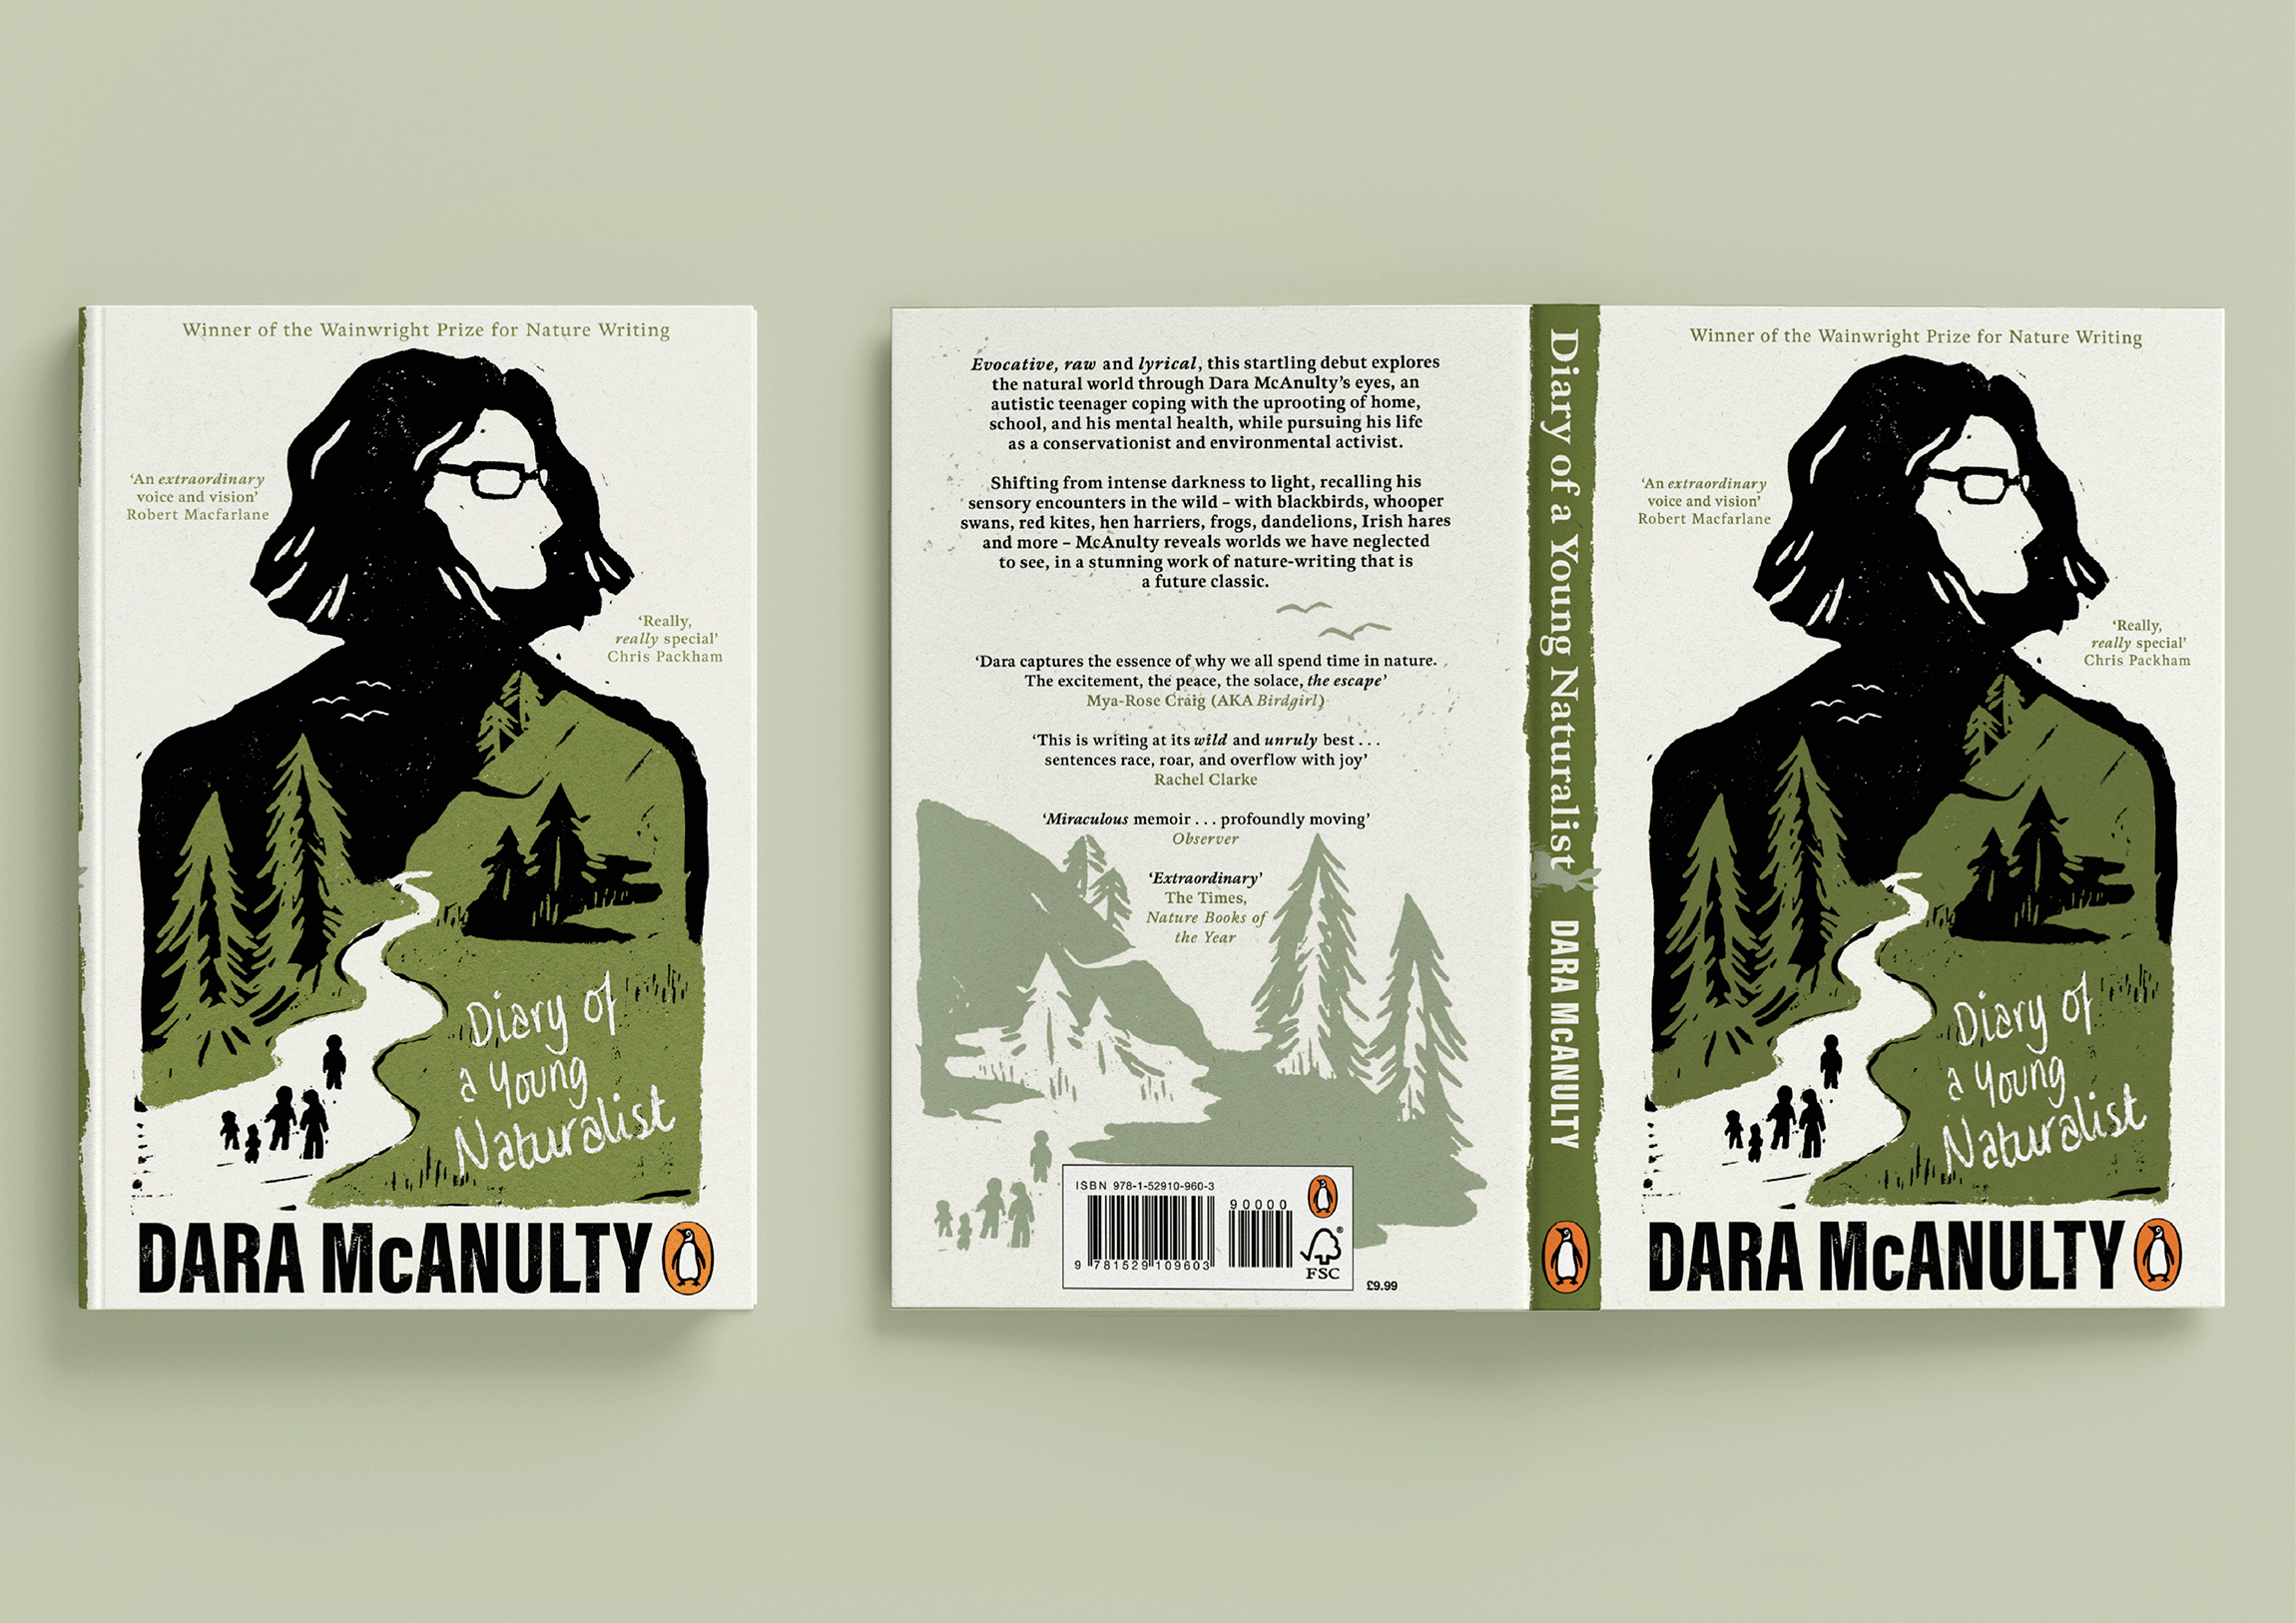 BA Design for Publishing work by Michaela-Jay Appleton, showing a book cover design. On the cover is a lino printed illustration of the author, with hand-rendered typography for the title.